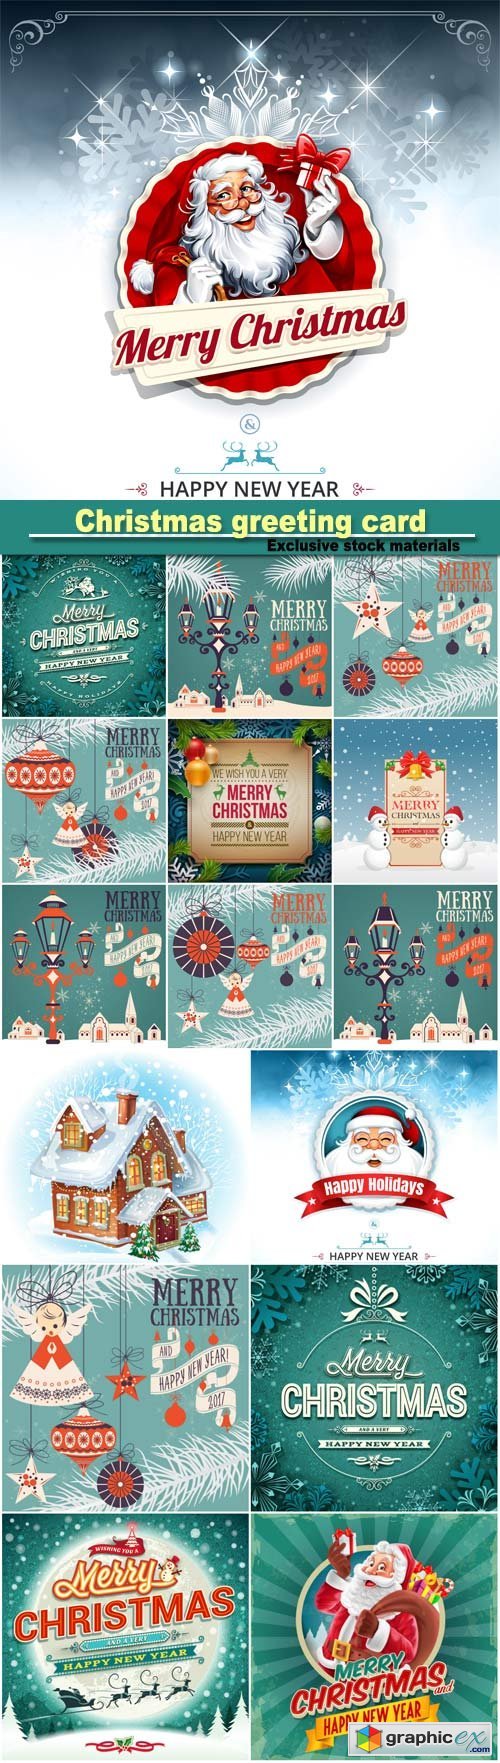 Vintage Christmas greeting card with Santa Claus, calligraphic and typographic design elements